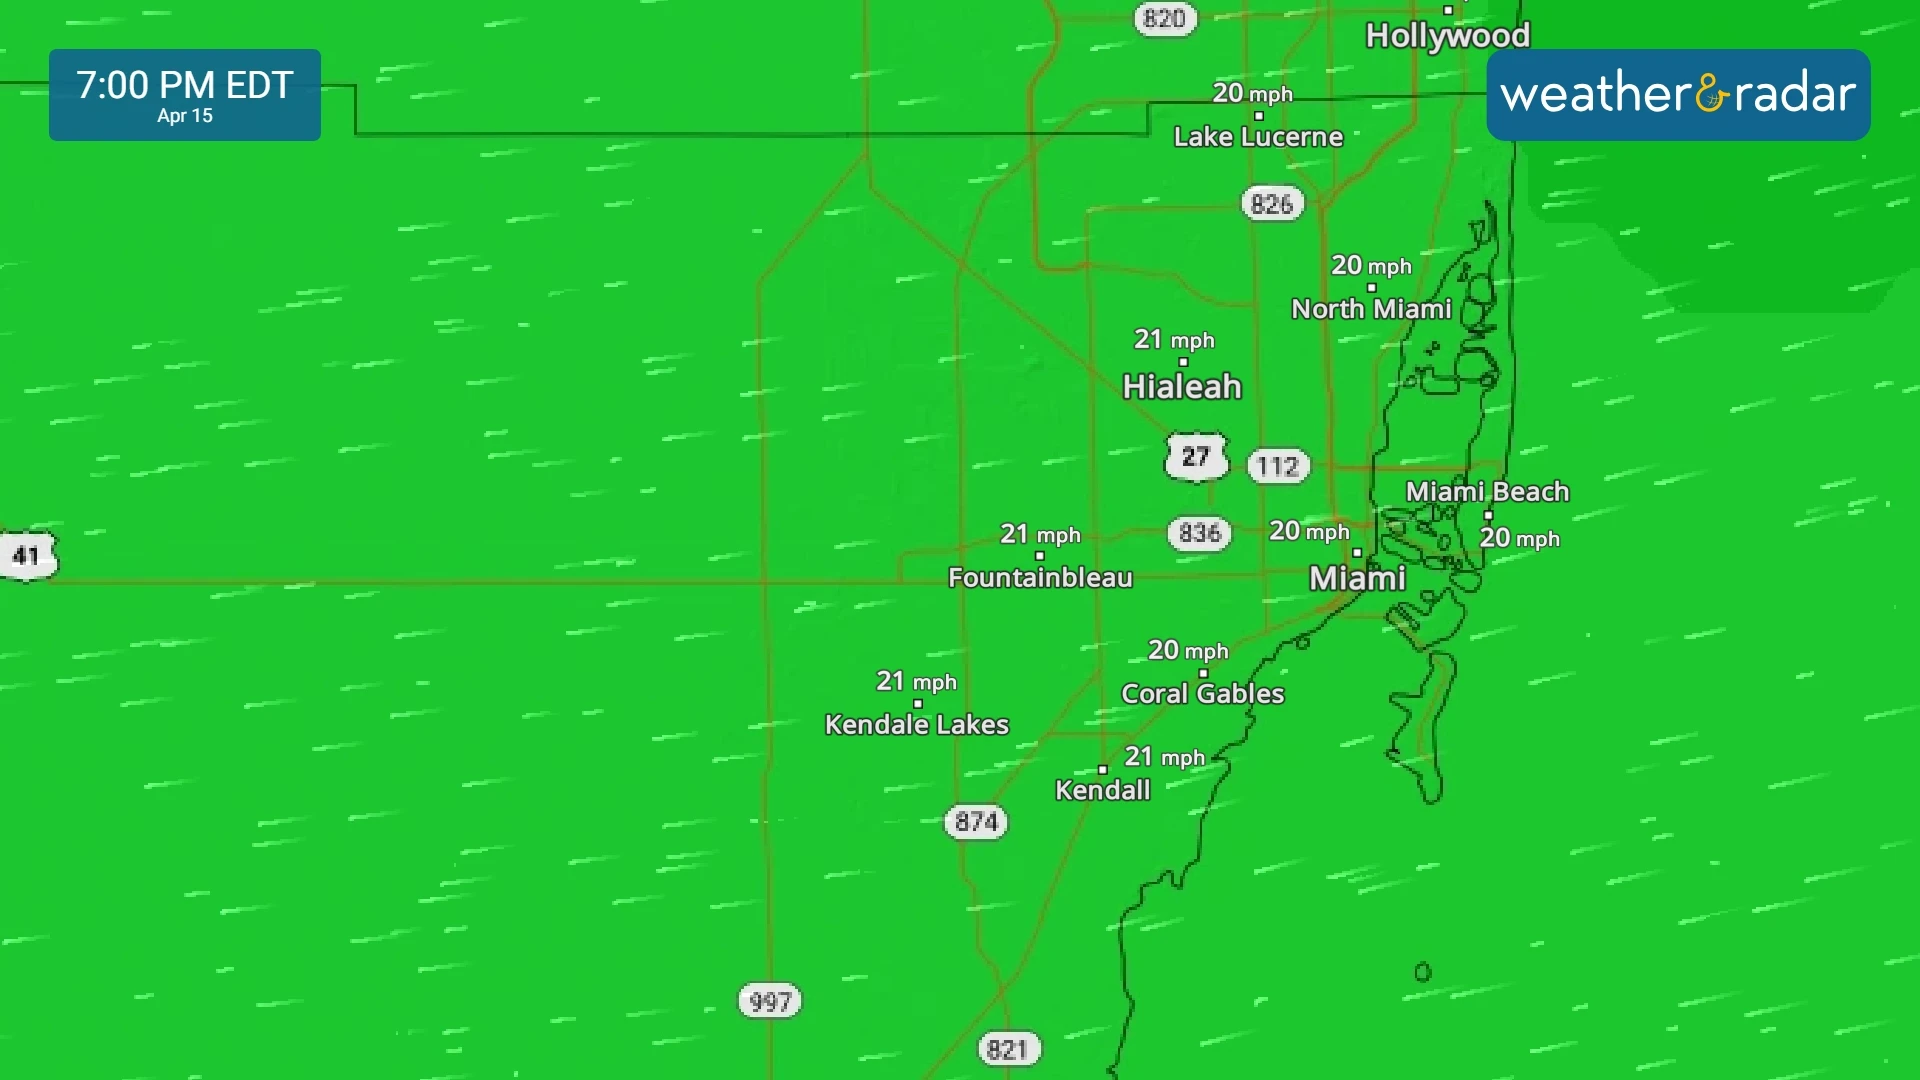 Winds coming from the east, at times strong over western Miami-Dade, Florida. 